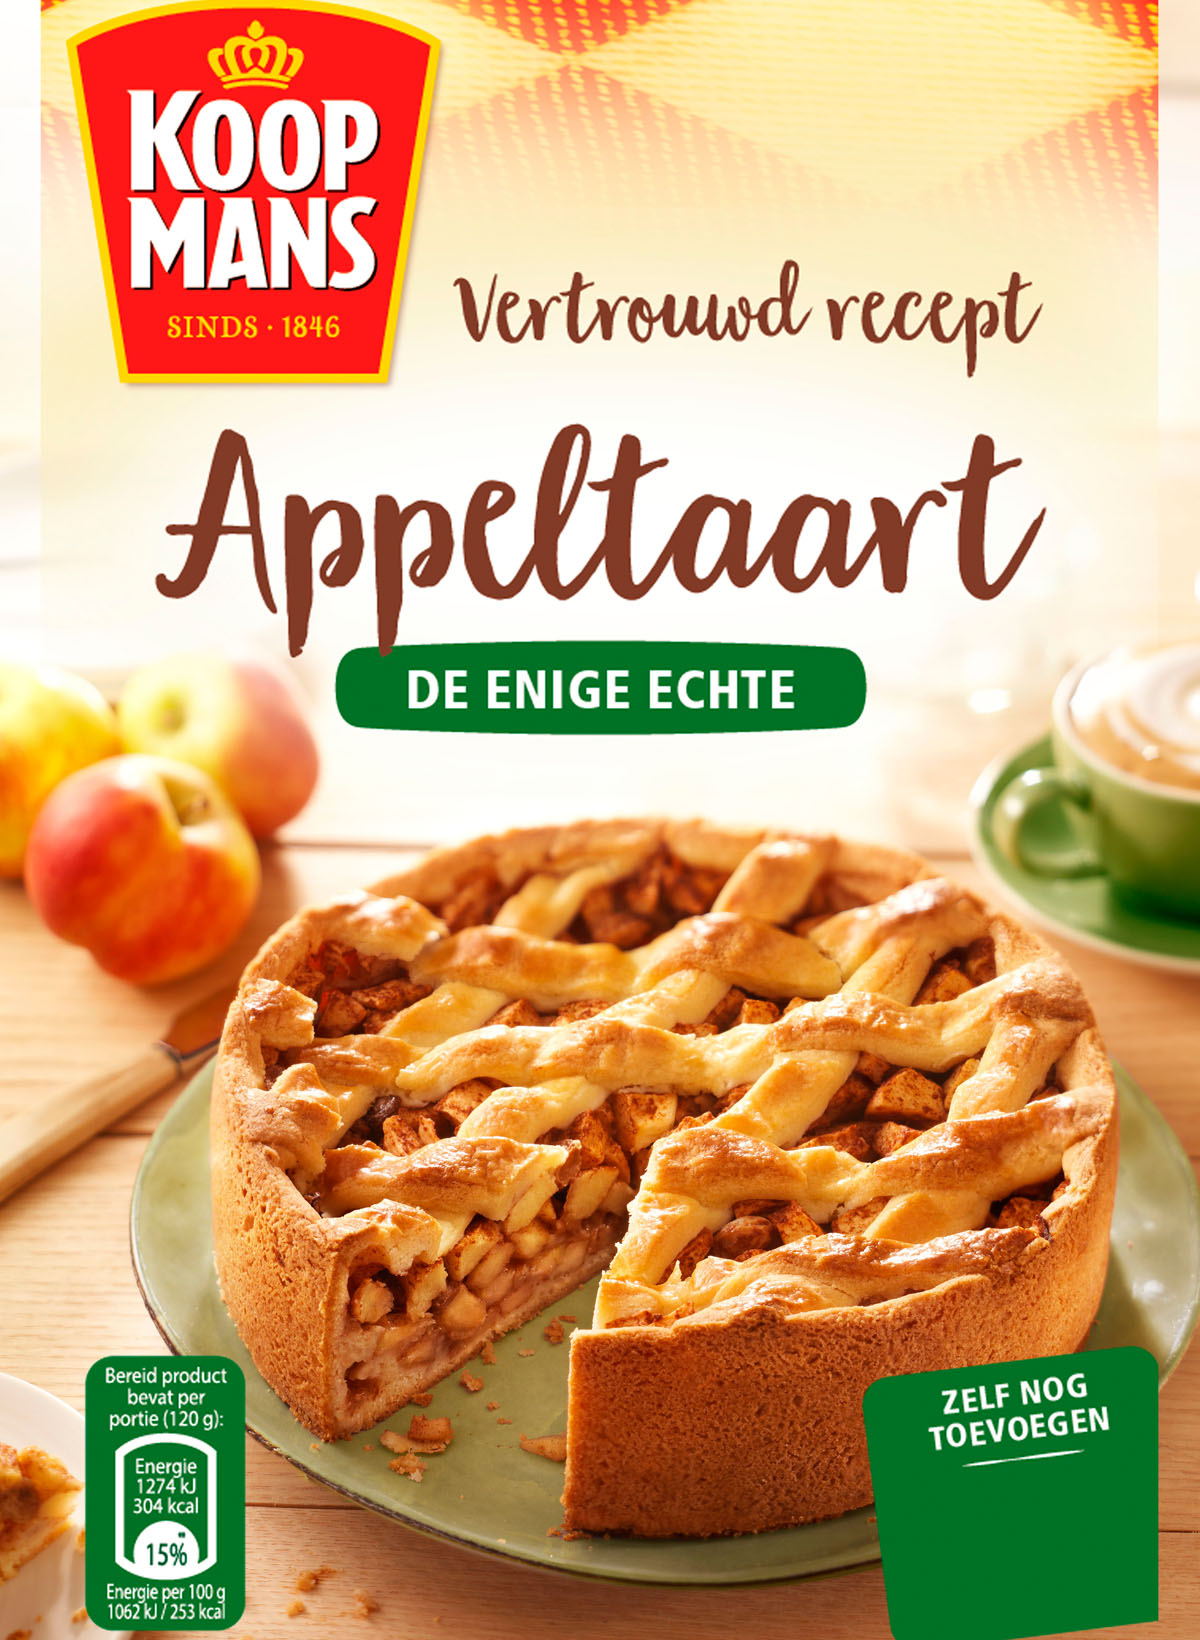 Packaging photography for Koopmans apple pie by studio_m foodphotographer